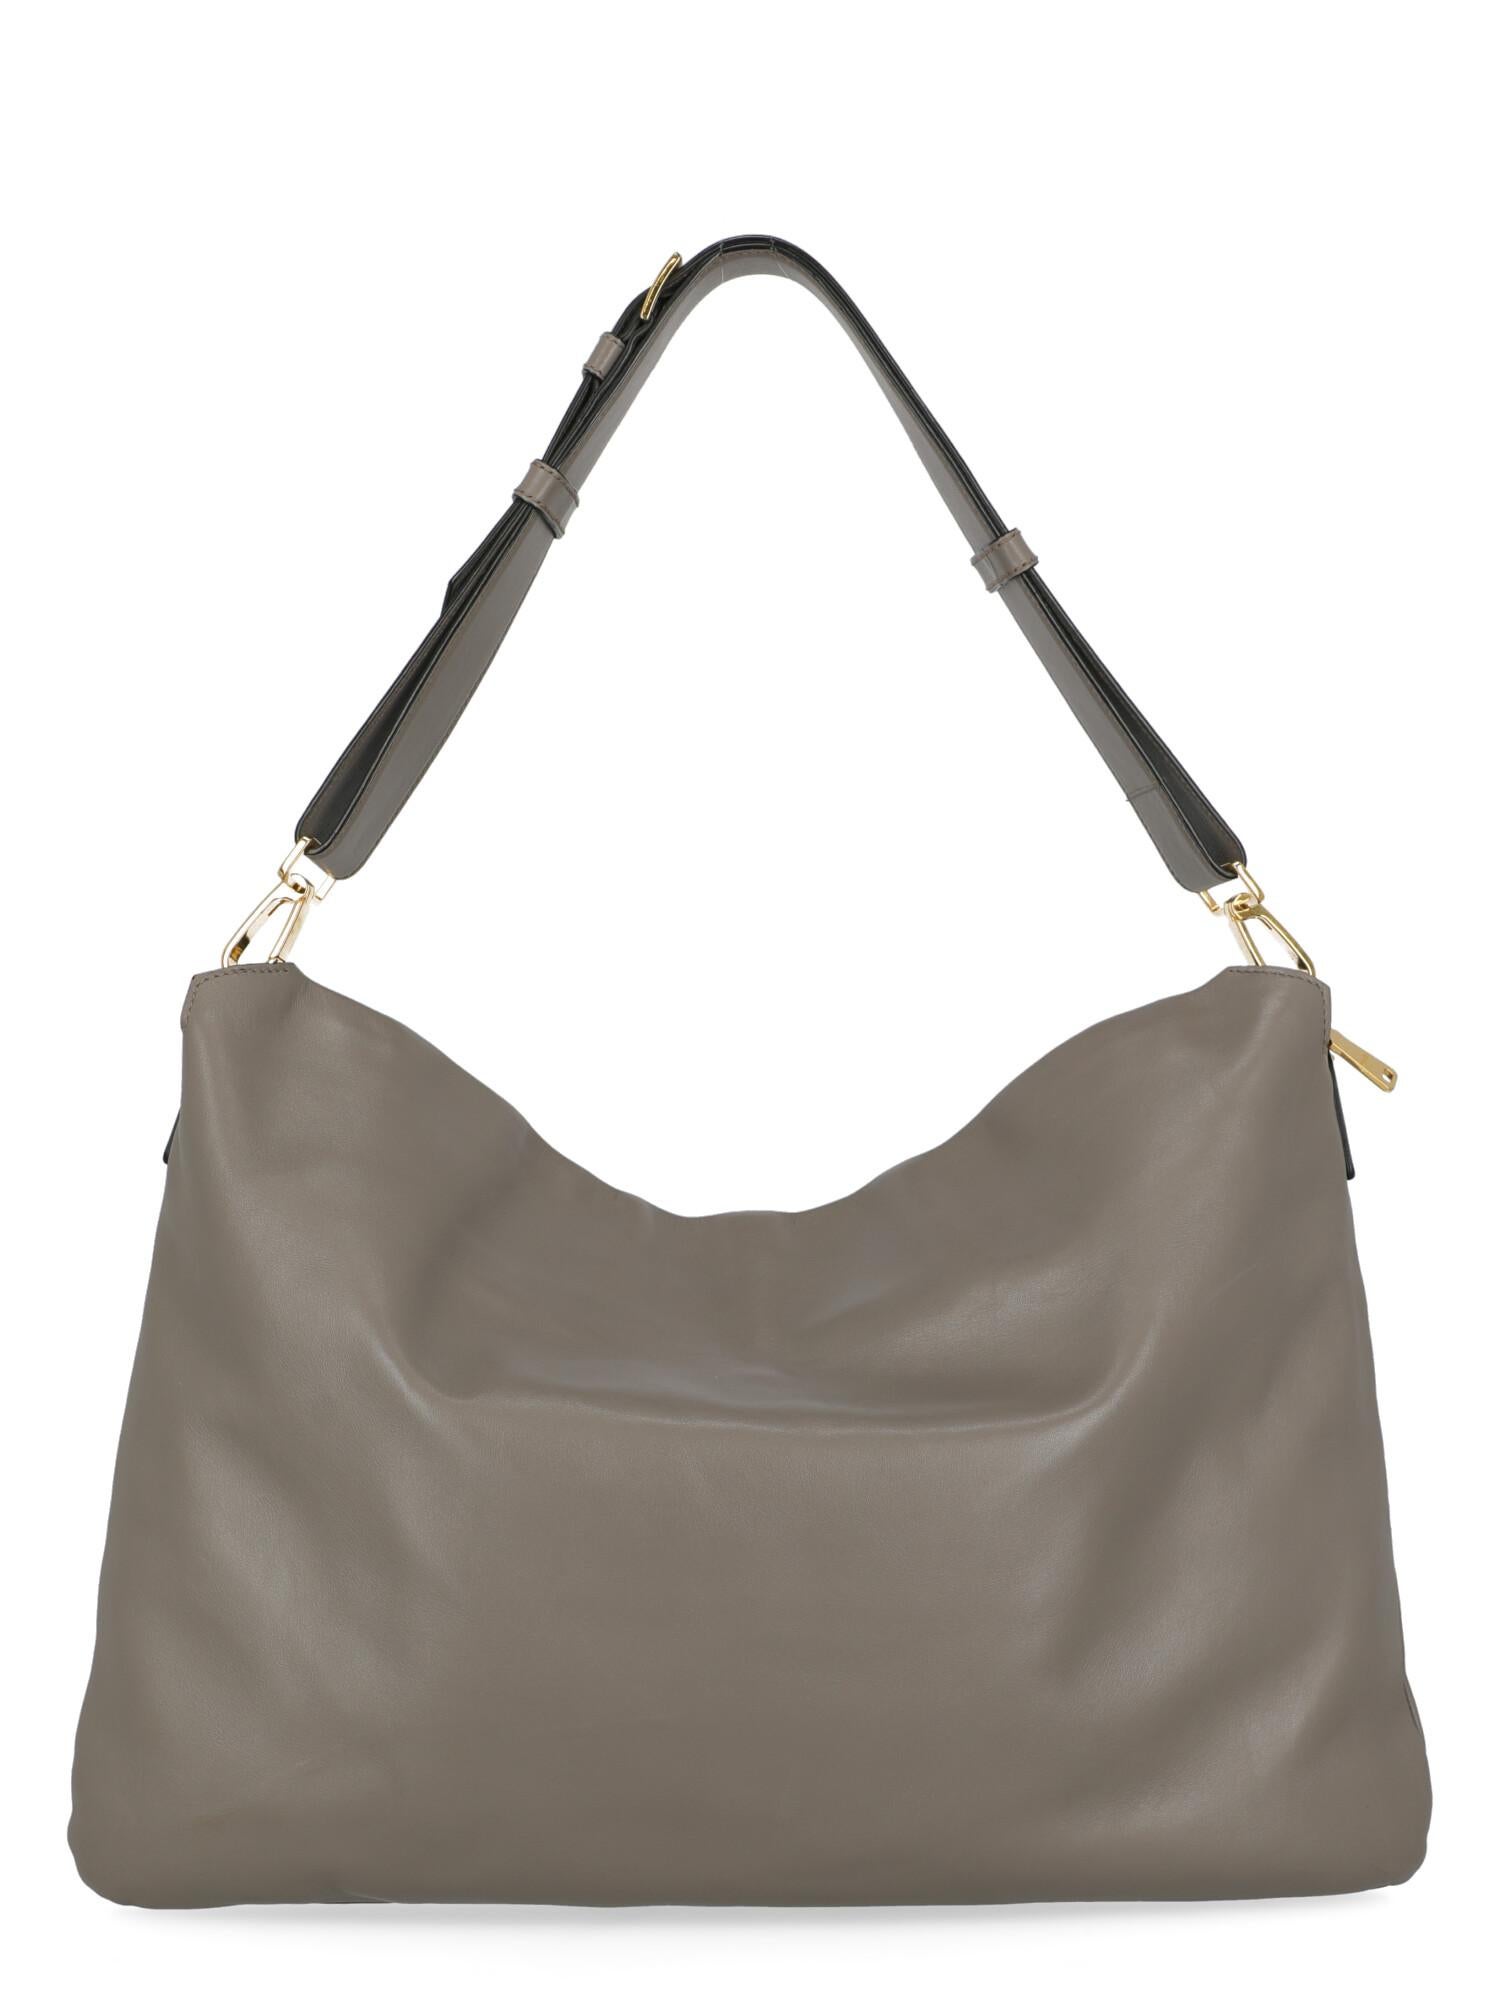 Miu Miu Women Shoulder bags Grey Leather  In Fair Condition For Sale In Milan, IT